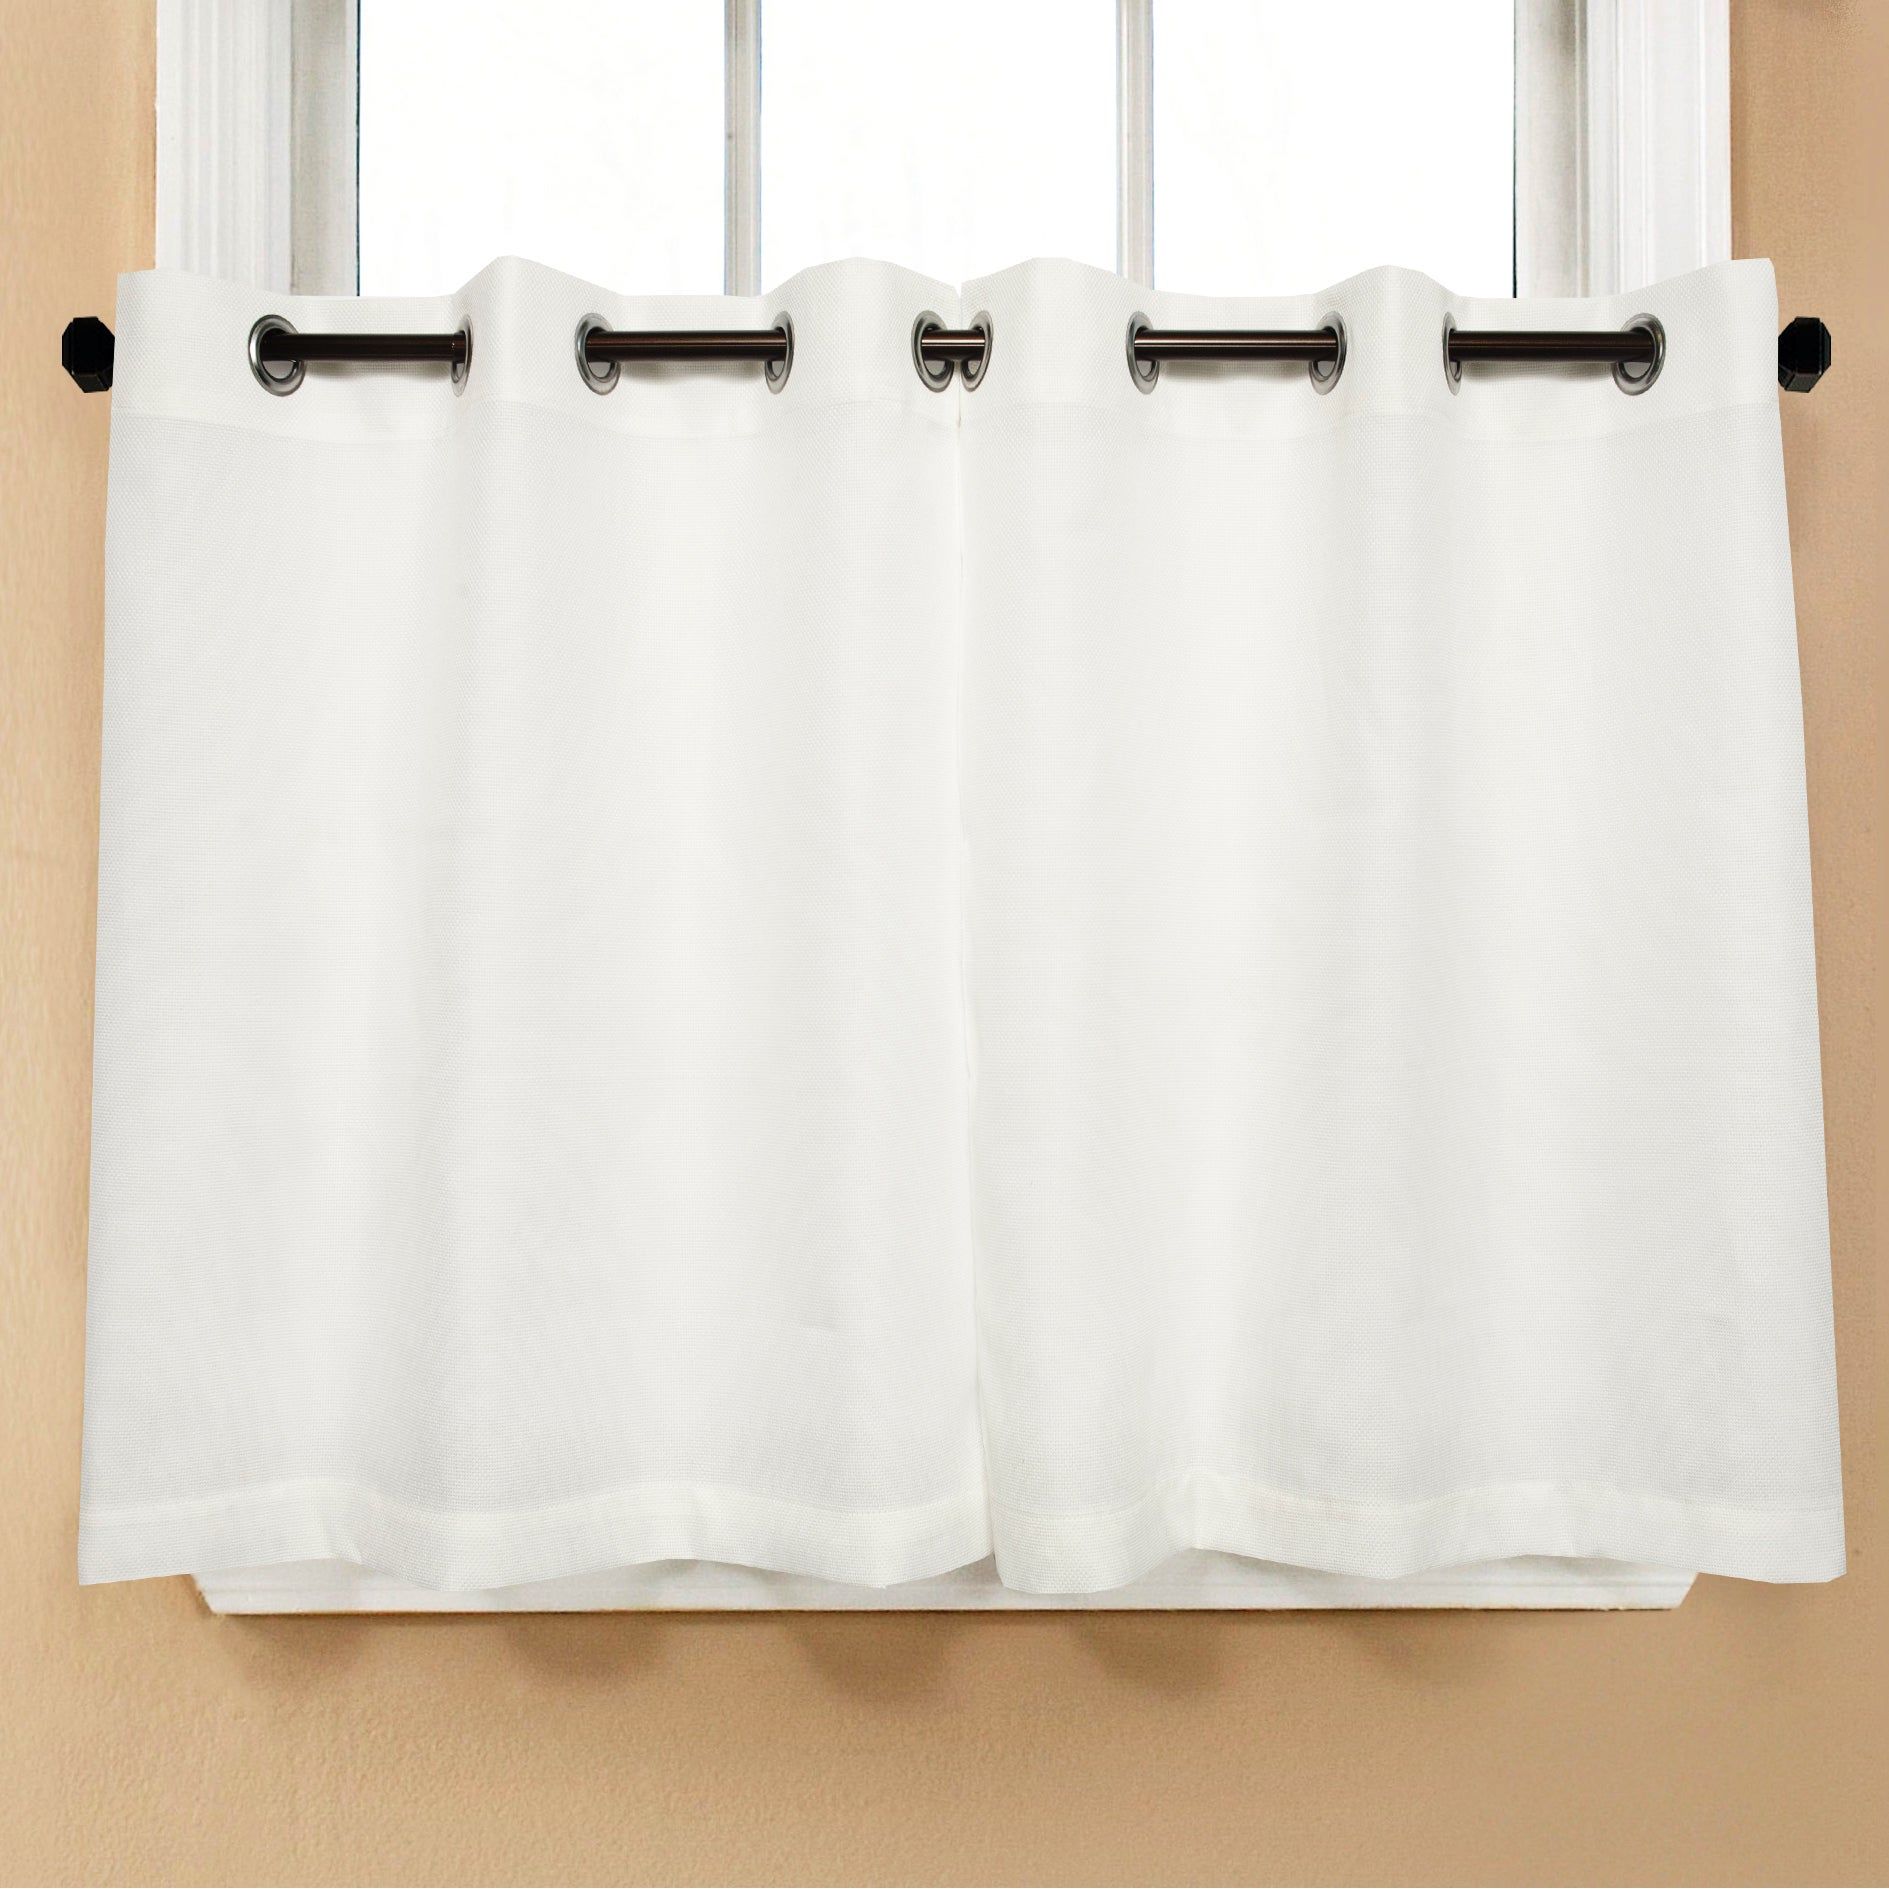 Modern Subtle Texture Solid White Kitchen Curtain Parts With Grommets  Tier  And Valance Options Within Modern Subtle Texture Solid Red Kitchen Curtains (View 3 of 20)